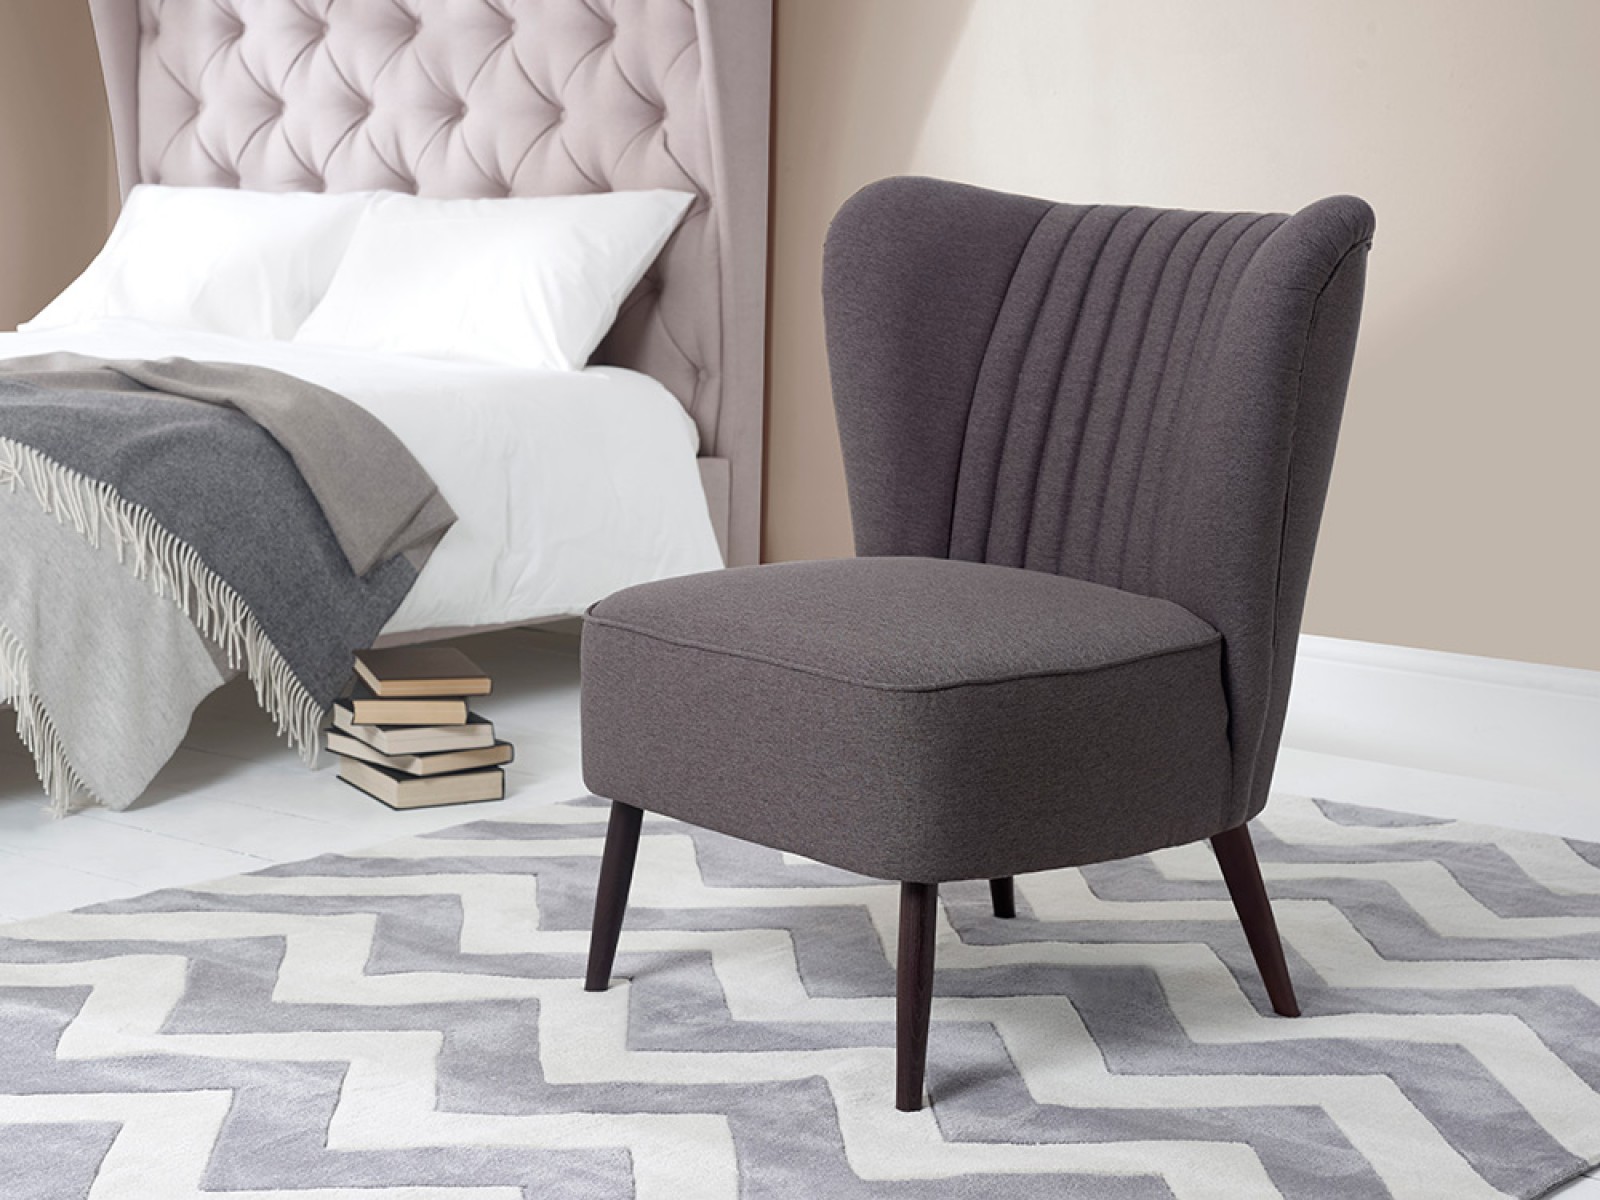 Top 10 Comfy Chairs for the Bedroom